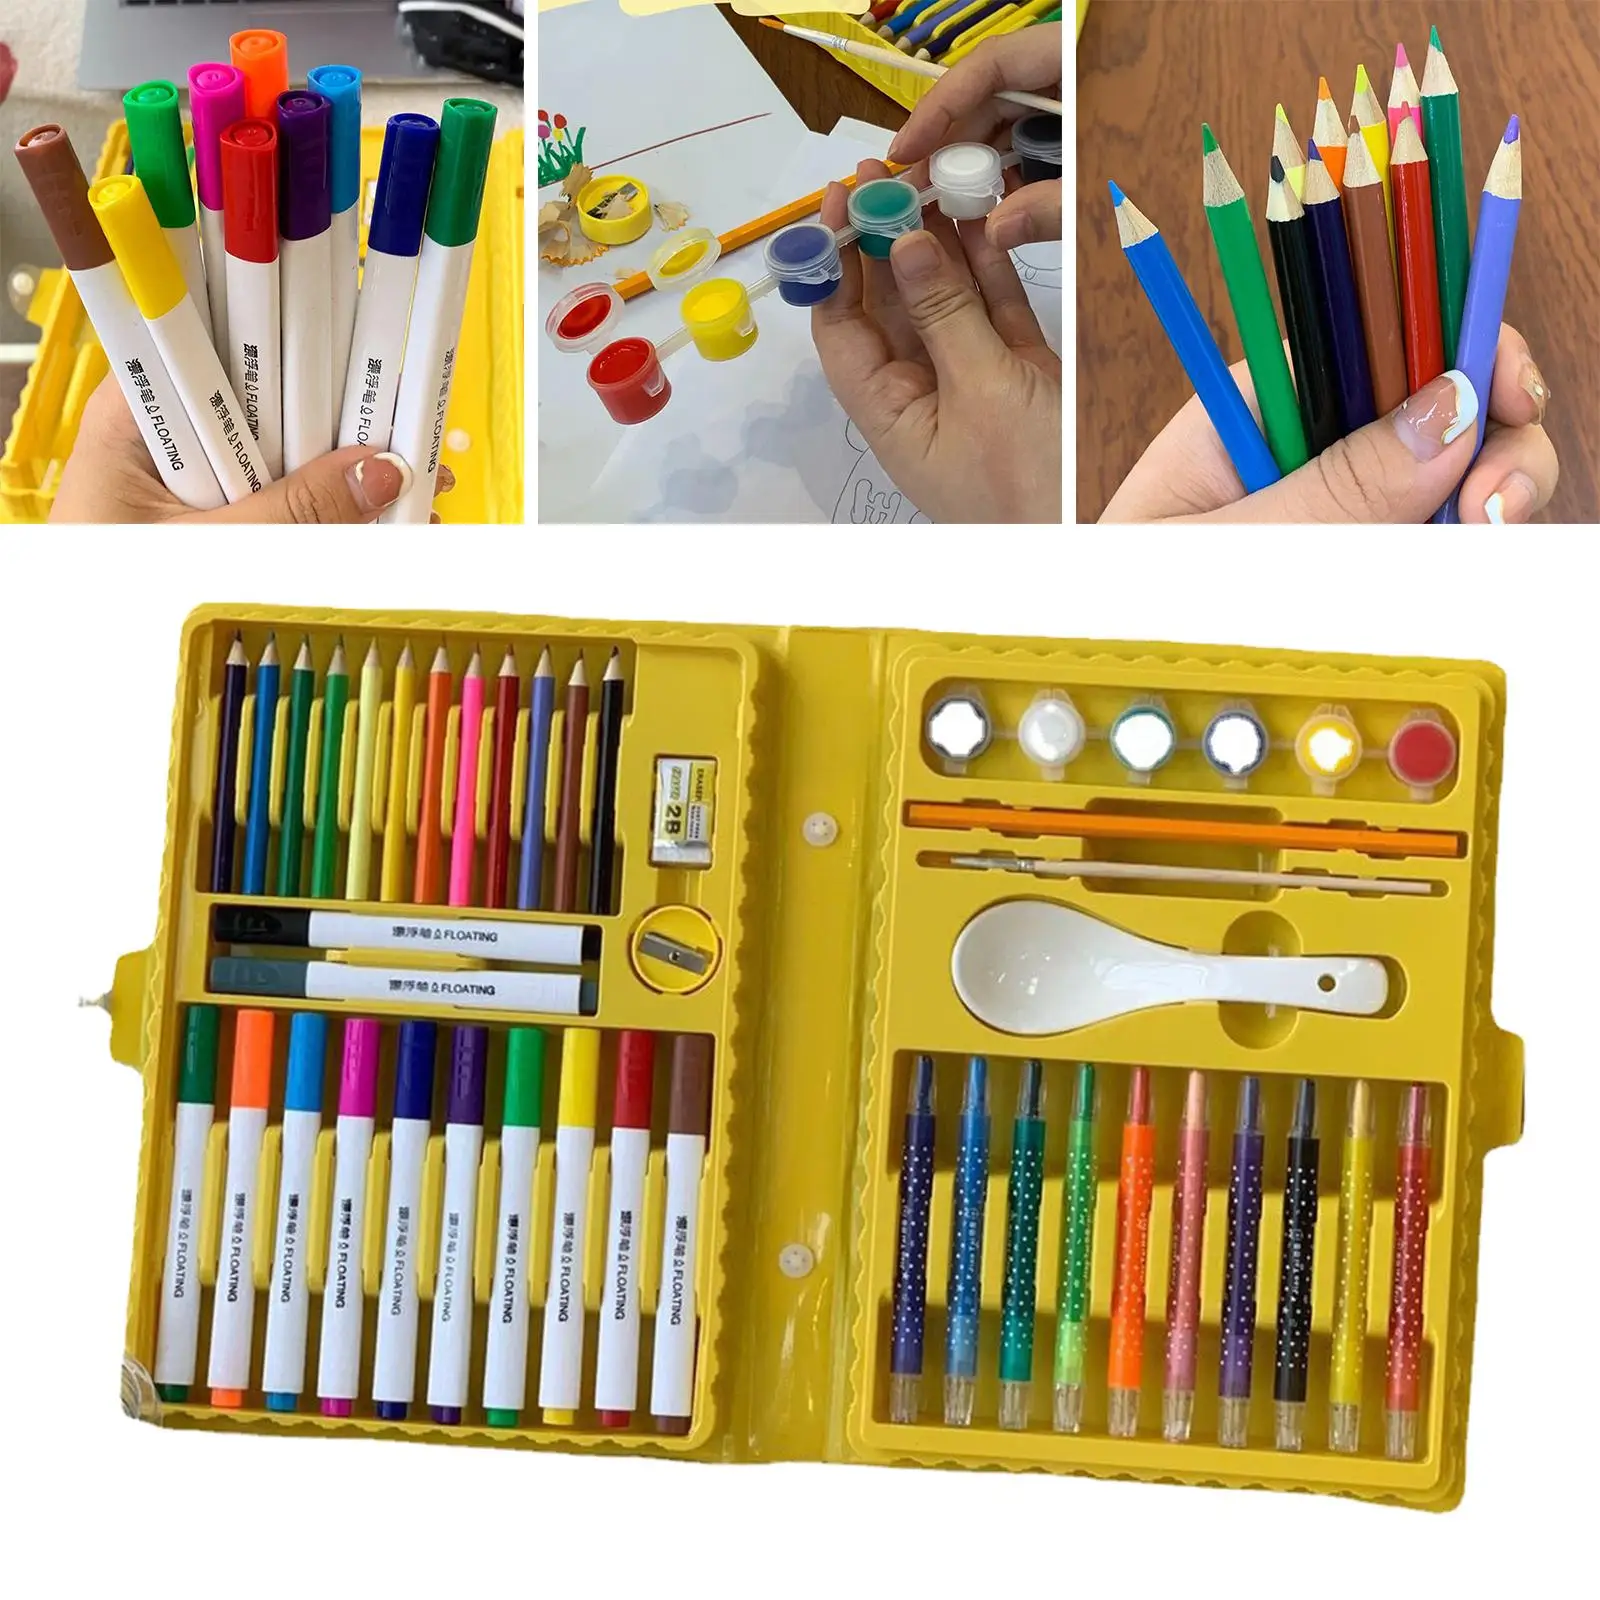 46Pcs Water Painting pens kids Doodle Drawing Pens Floating Ink Drawings Set for Board Writing Ceramic Office Reward